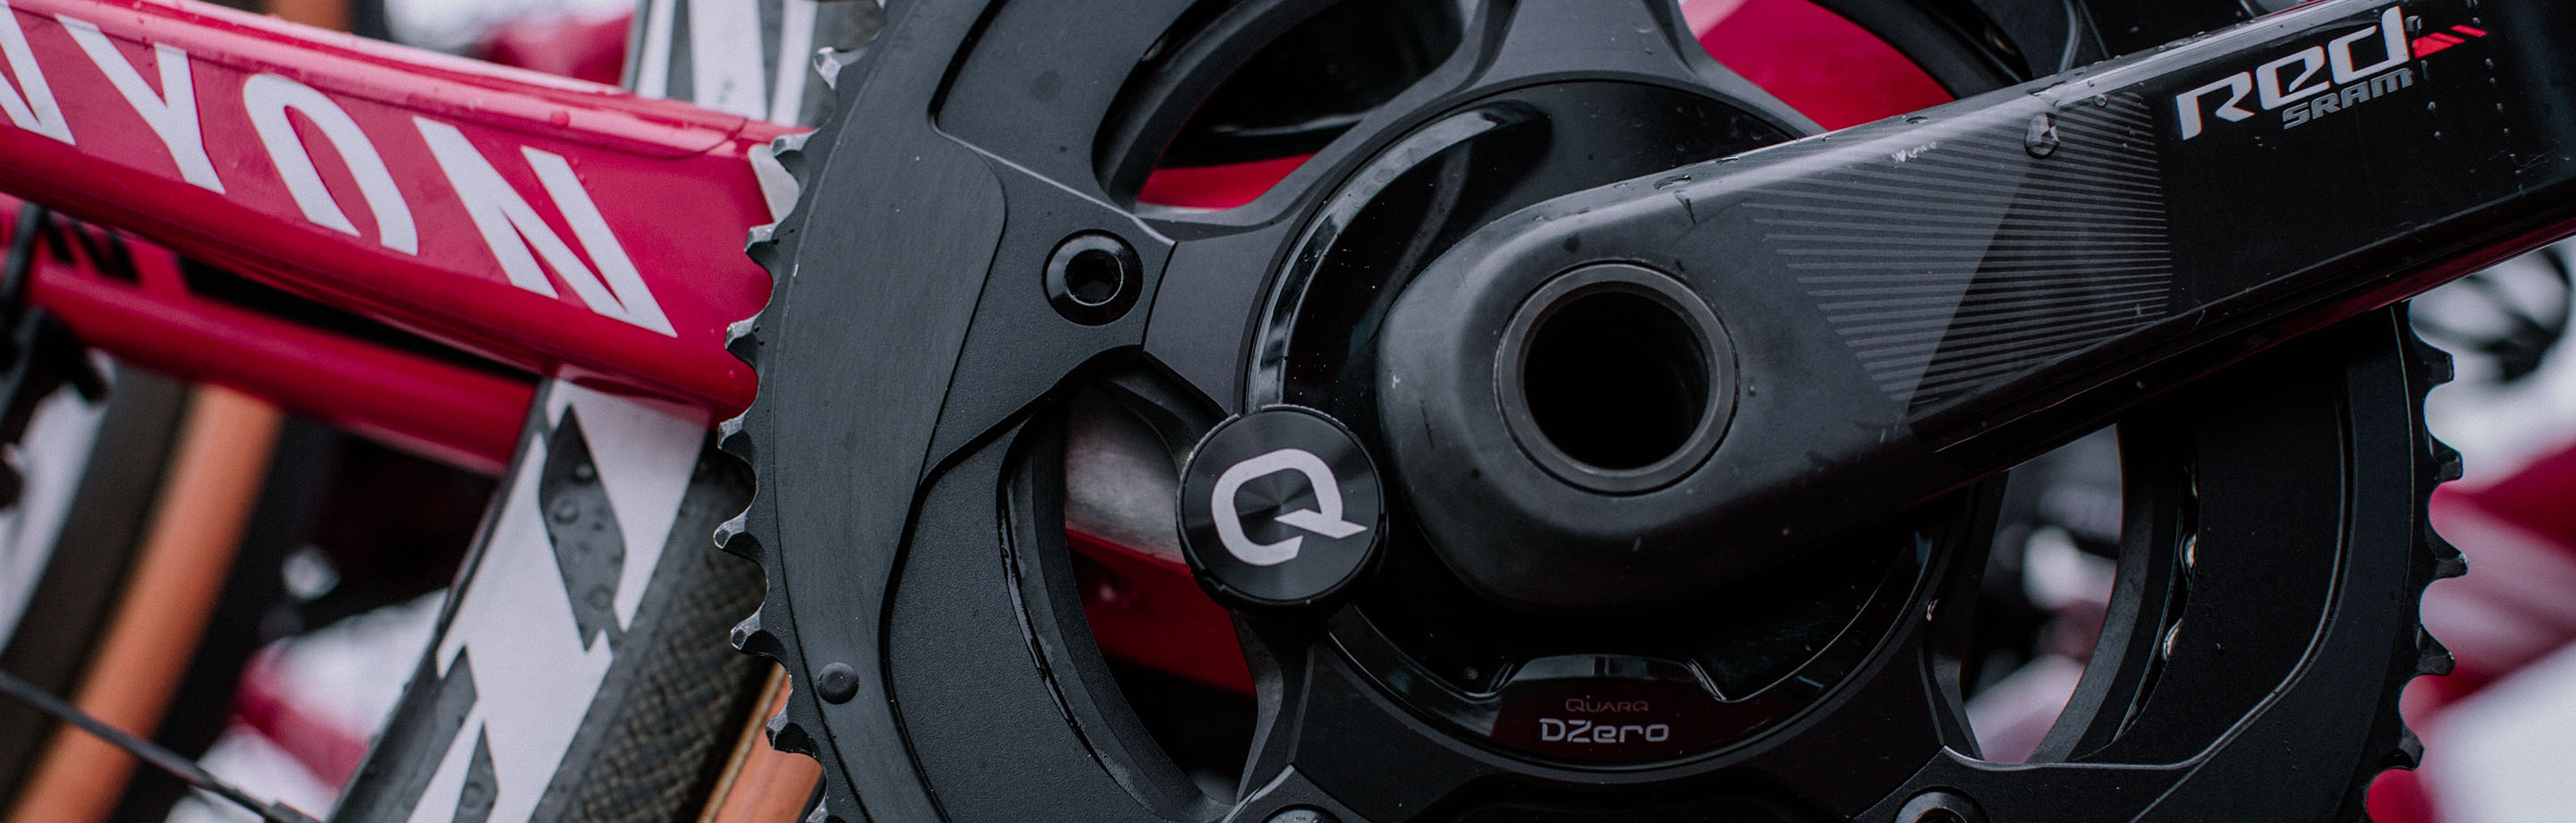 QUARQ Power Meter Crank Sets – A Class of Its Own